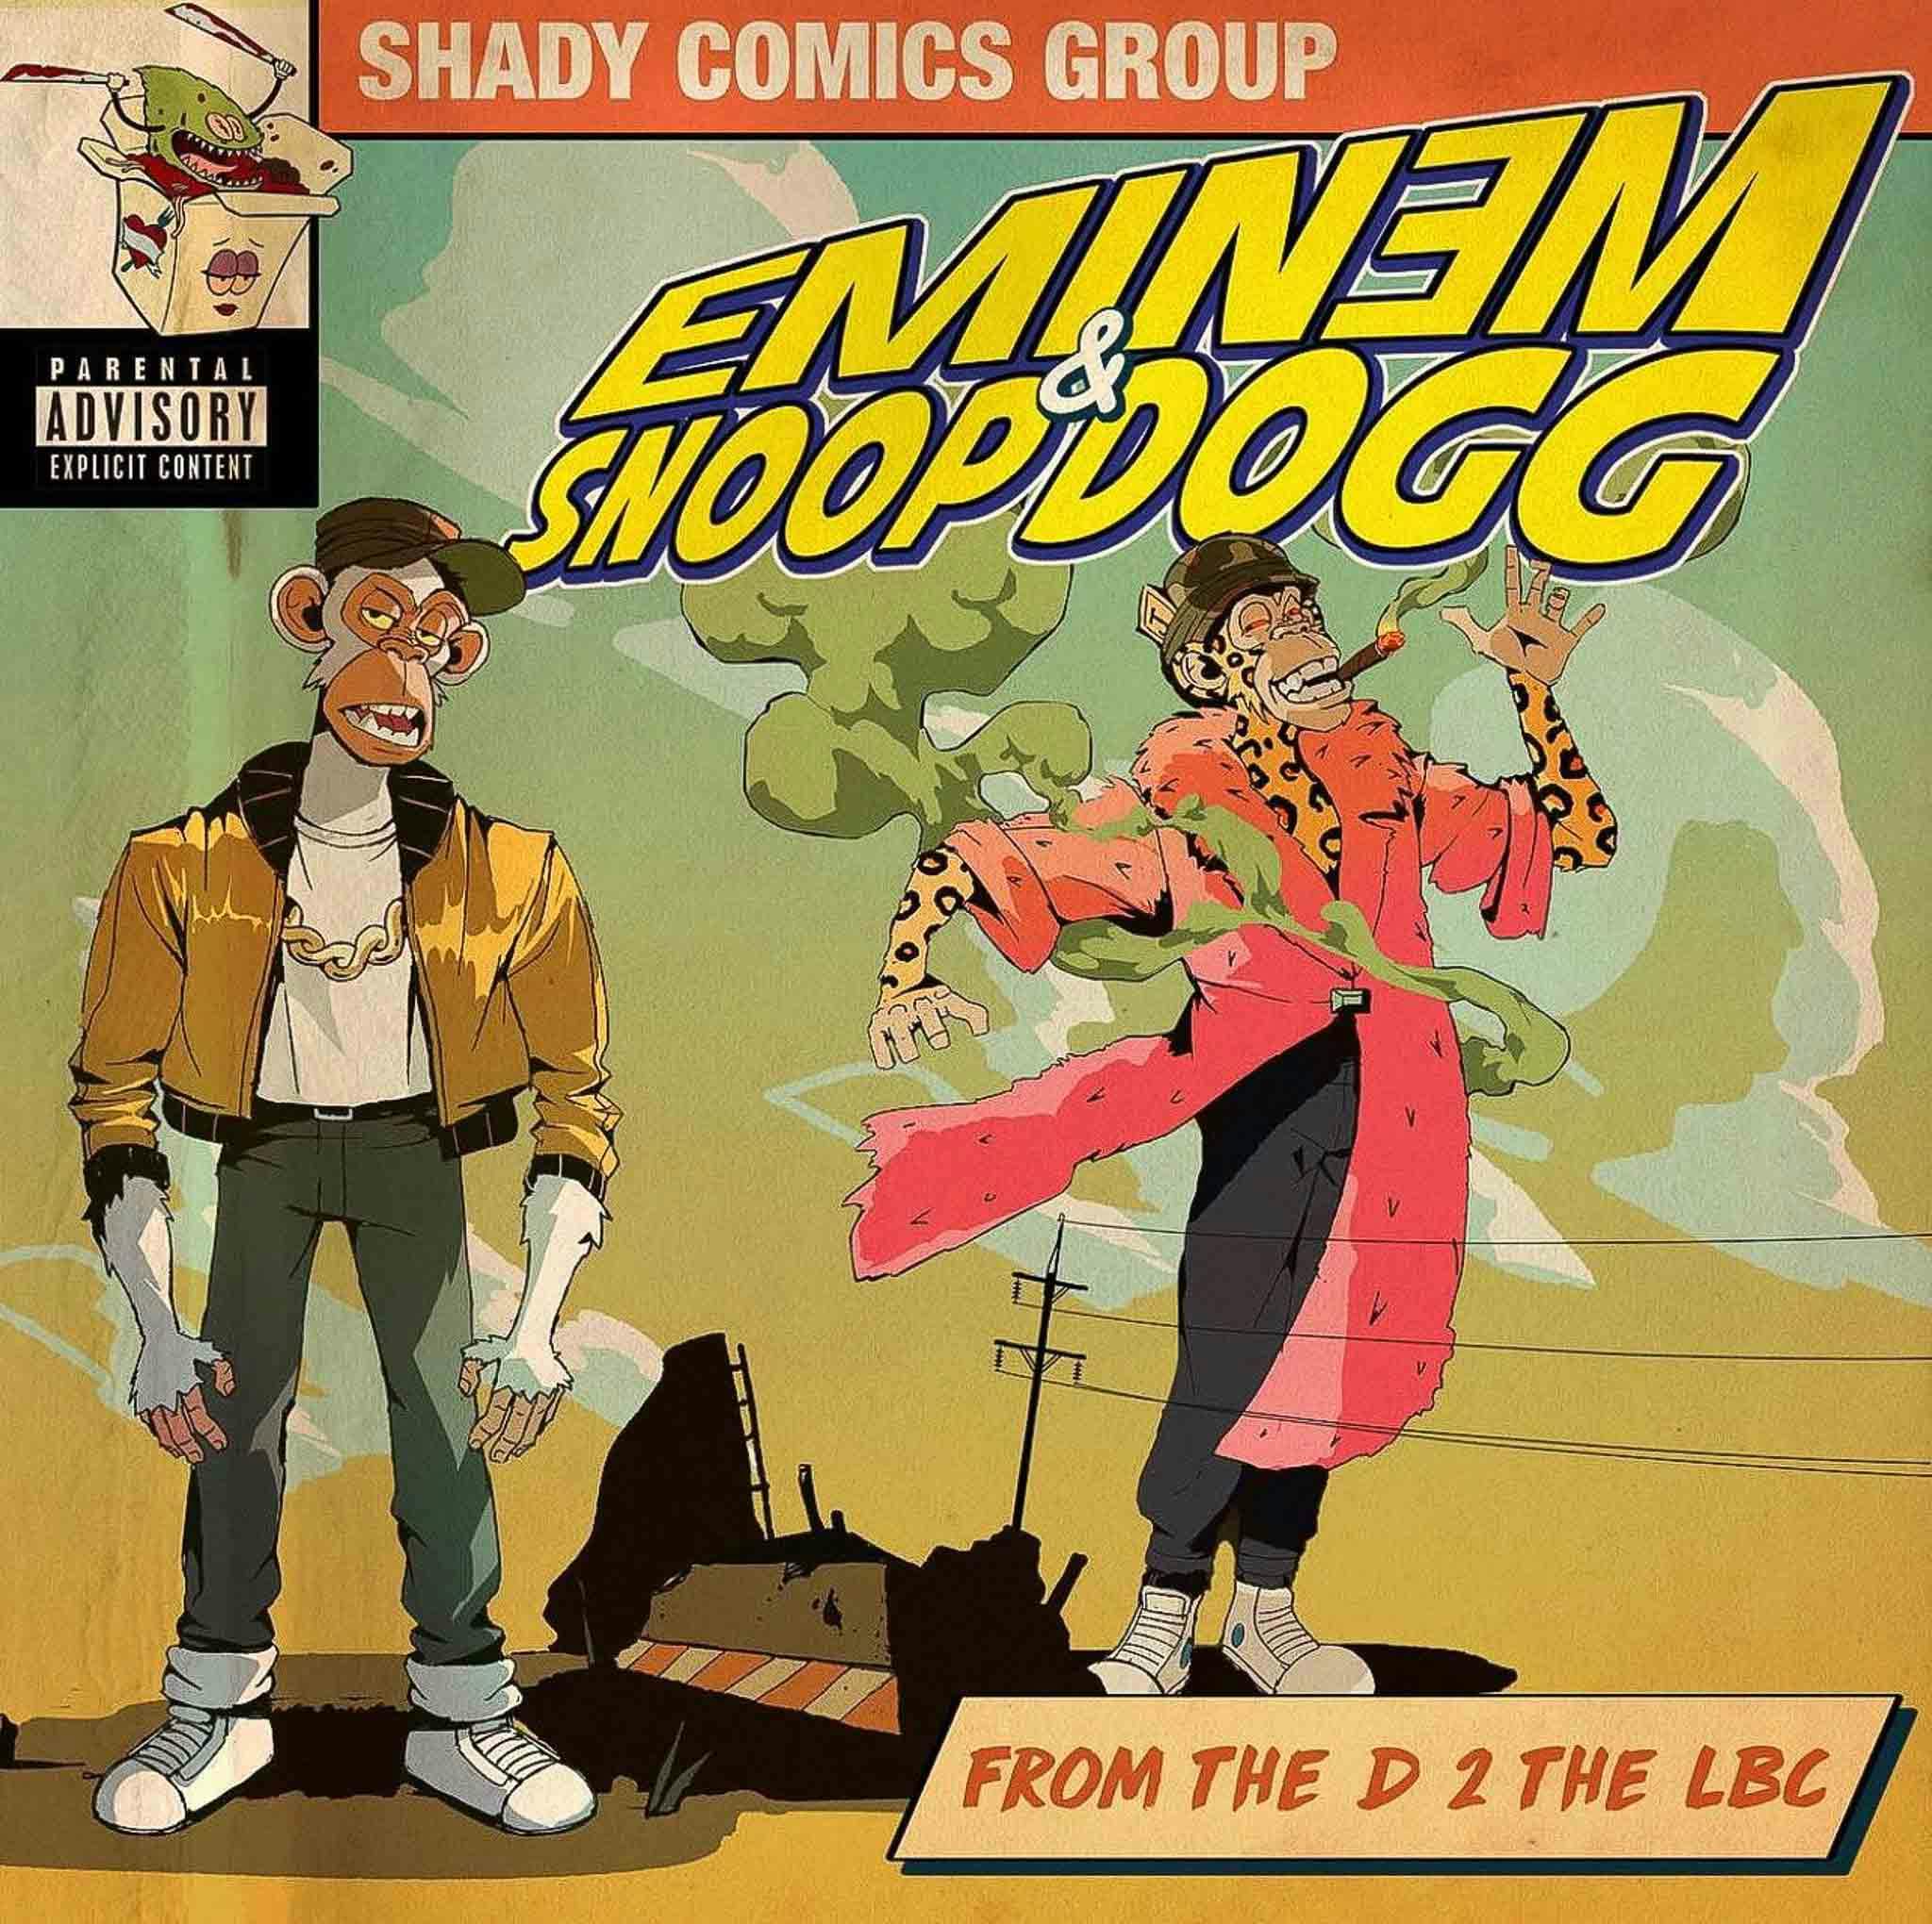 Eminem and Snoop Dogg - From the D 2 the LBC released by Shady Comics Group.